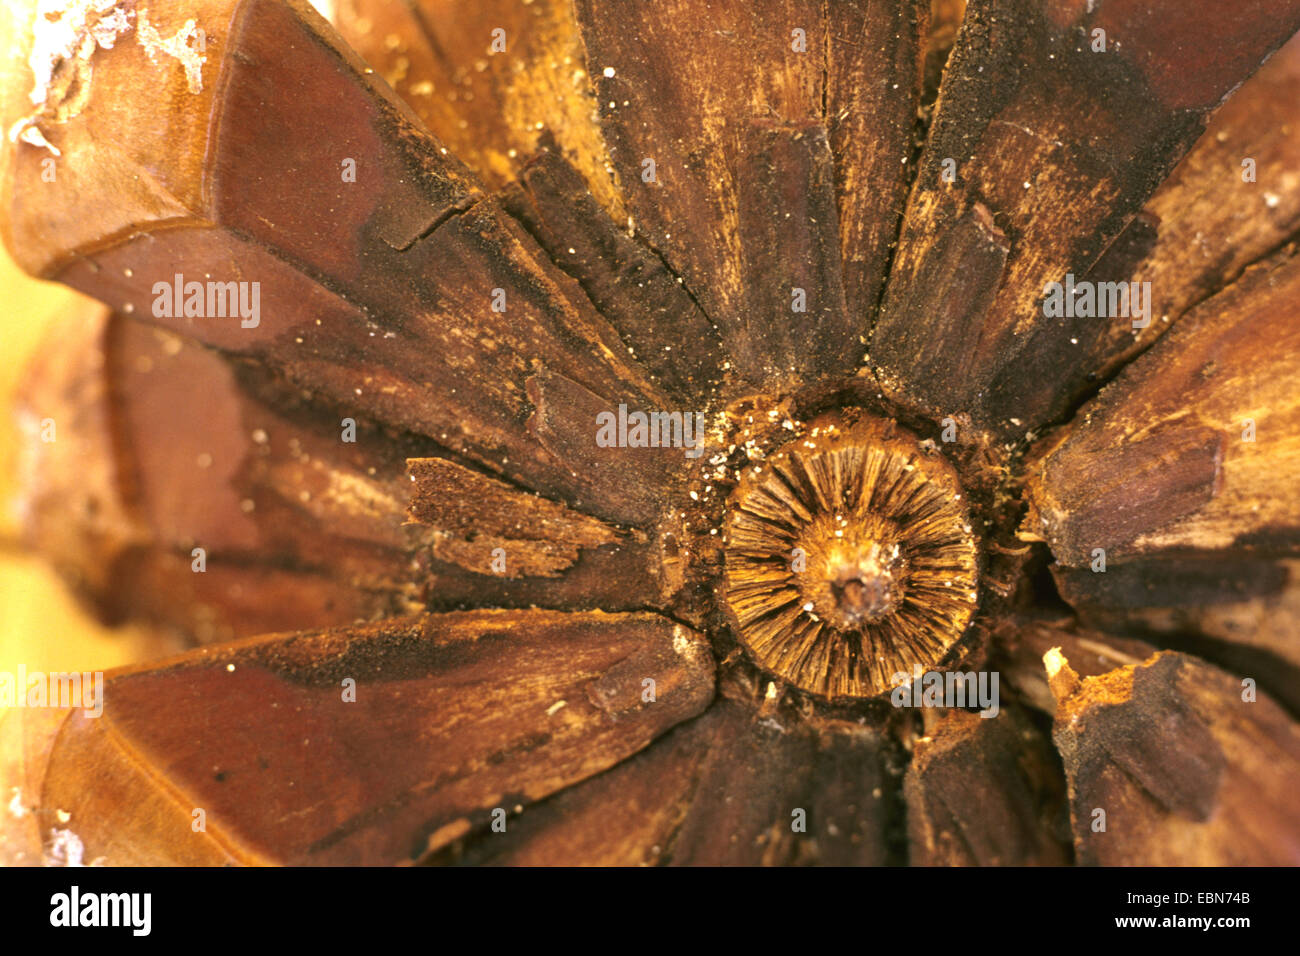 Cones Cannabis Flowers On Scales Measuring Stock Photo 1133514578